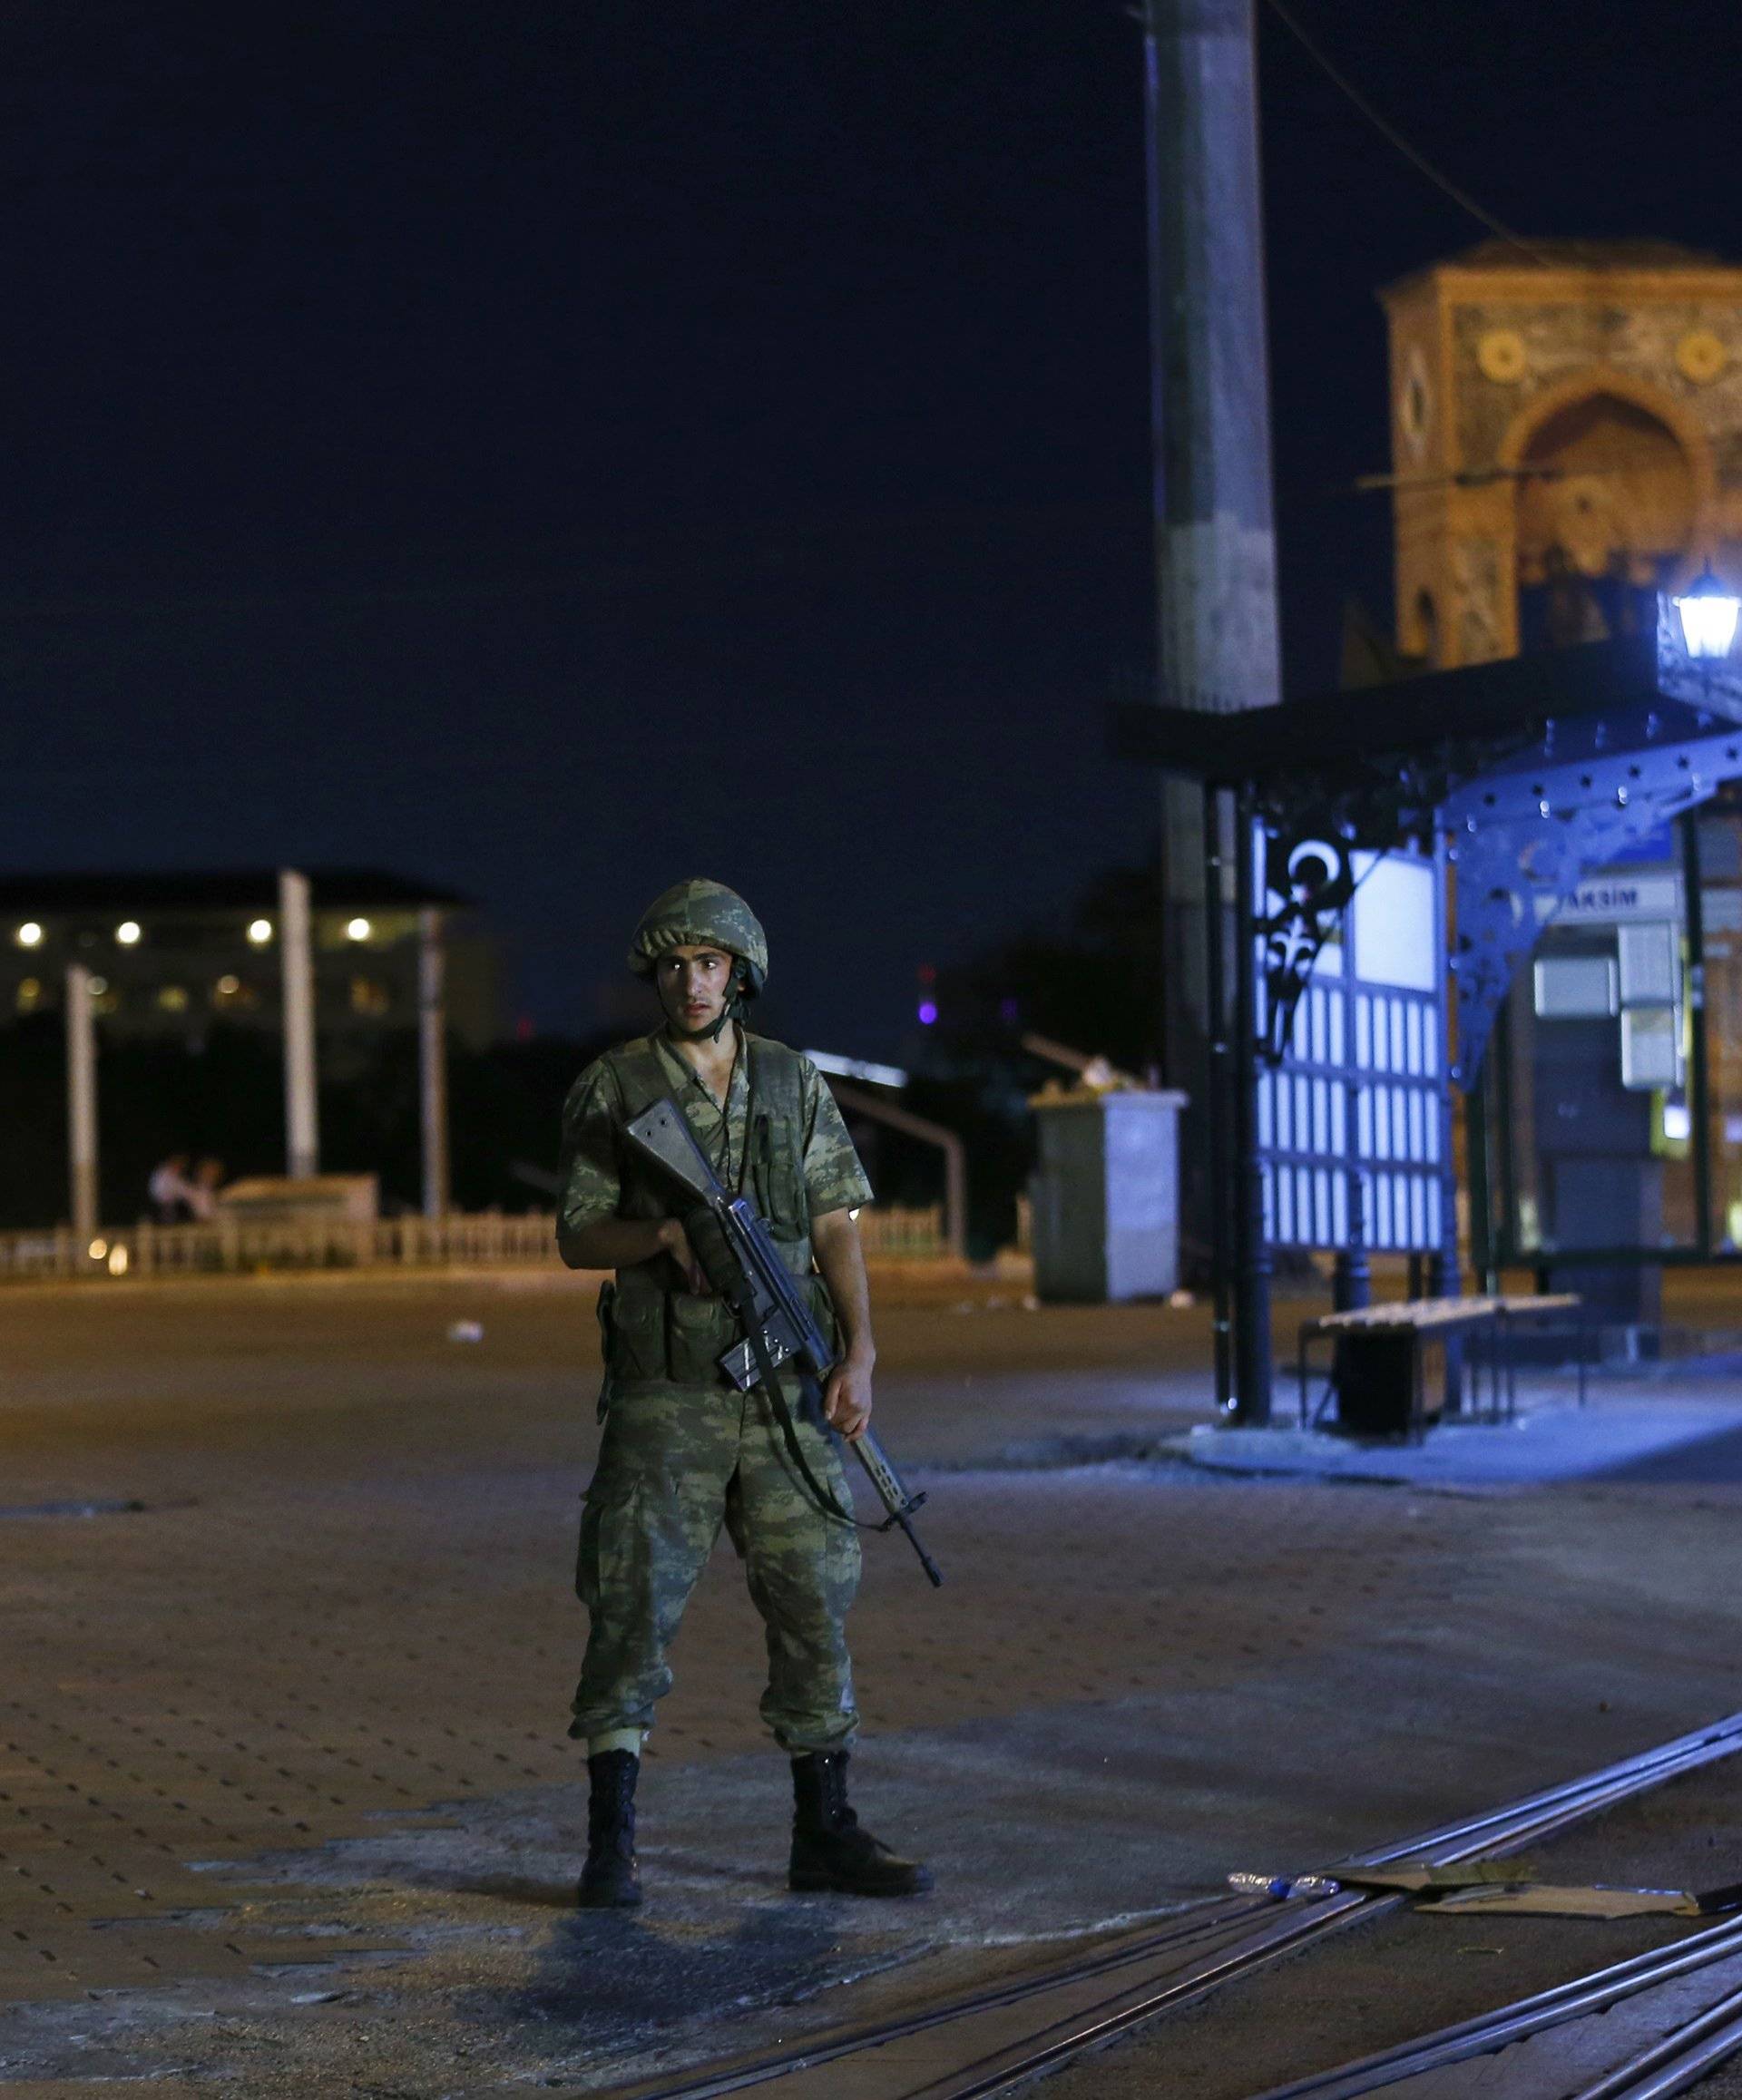 A Turkish military stands guard near the Taksim Square in Istanbul